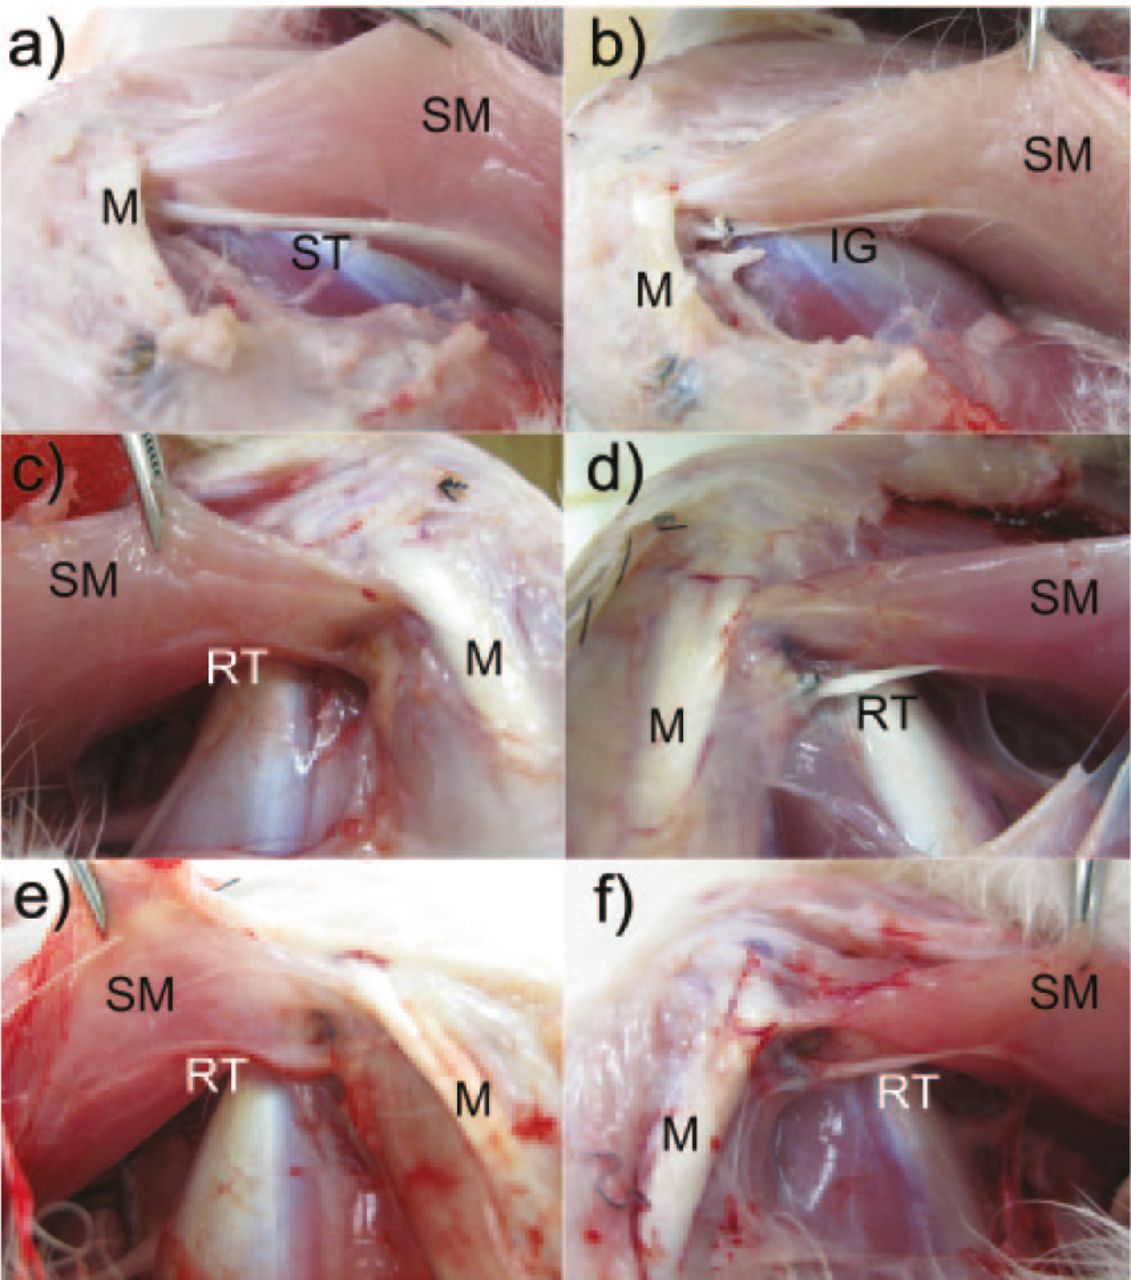 Fig. 3 
            Image of a) a normal semitendinosus tendon; b) inducing graft (IG) immediately after grafting; c) regenerated tissue on the control side at post-operative week 4; d) regenerated tissue on the IG side at post-operative week 4; e) regenerated tissue on the control side at post-operative week 8; and f) regenerated tissue on the IG side at post-operative week 8. (ST, semitendinosus tendon; SM, semimembranosus muscle; M, medial contralateral ligament; RT, regenerated tissue).
          